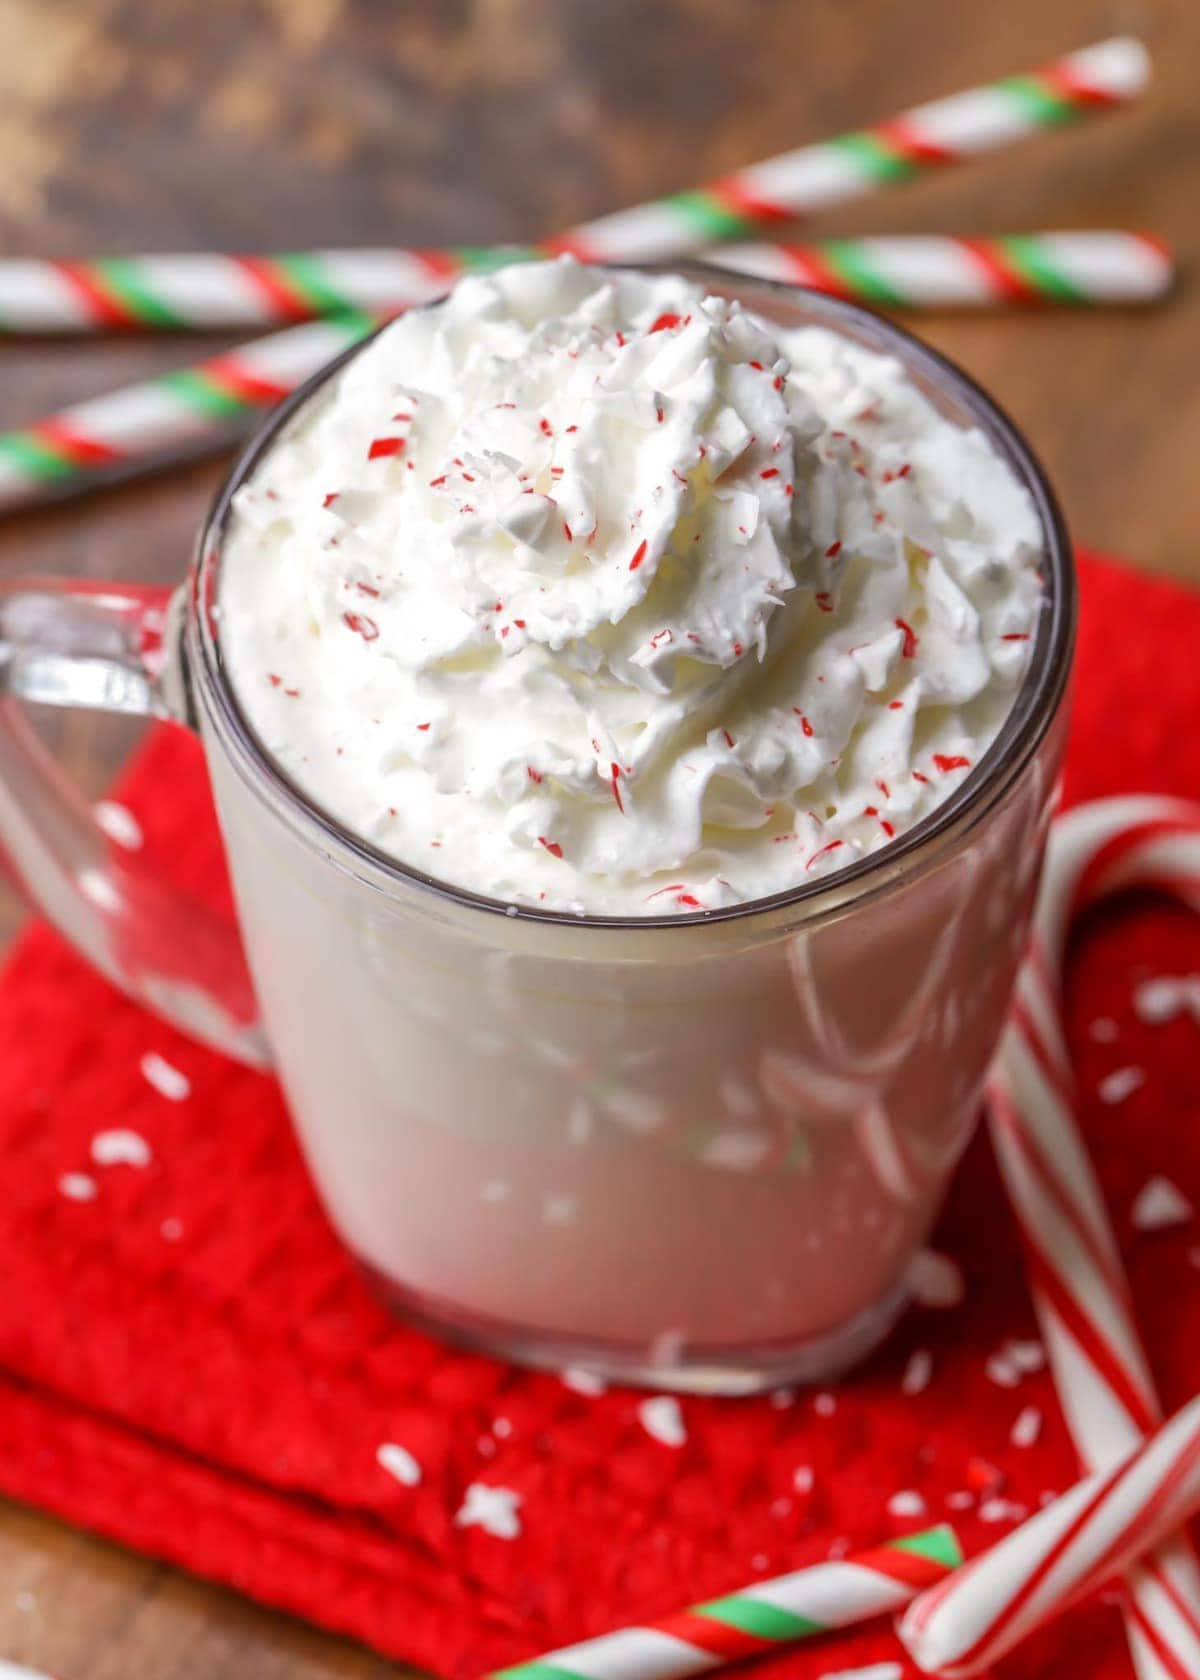 Holiday drink ideas - white chocolate peppermint hot cocoa topped with whipped cream.